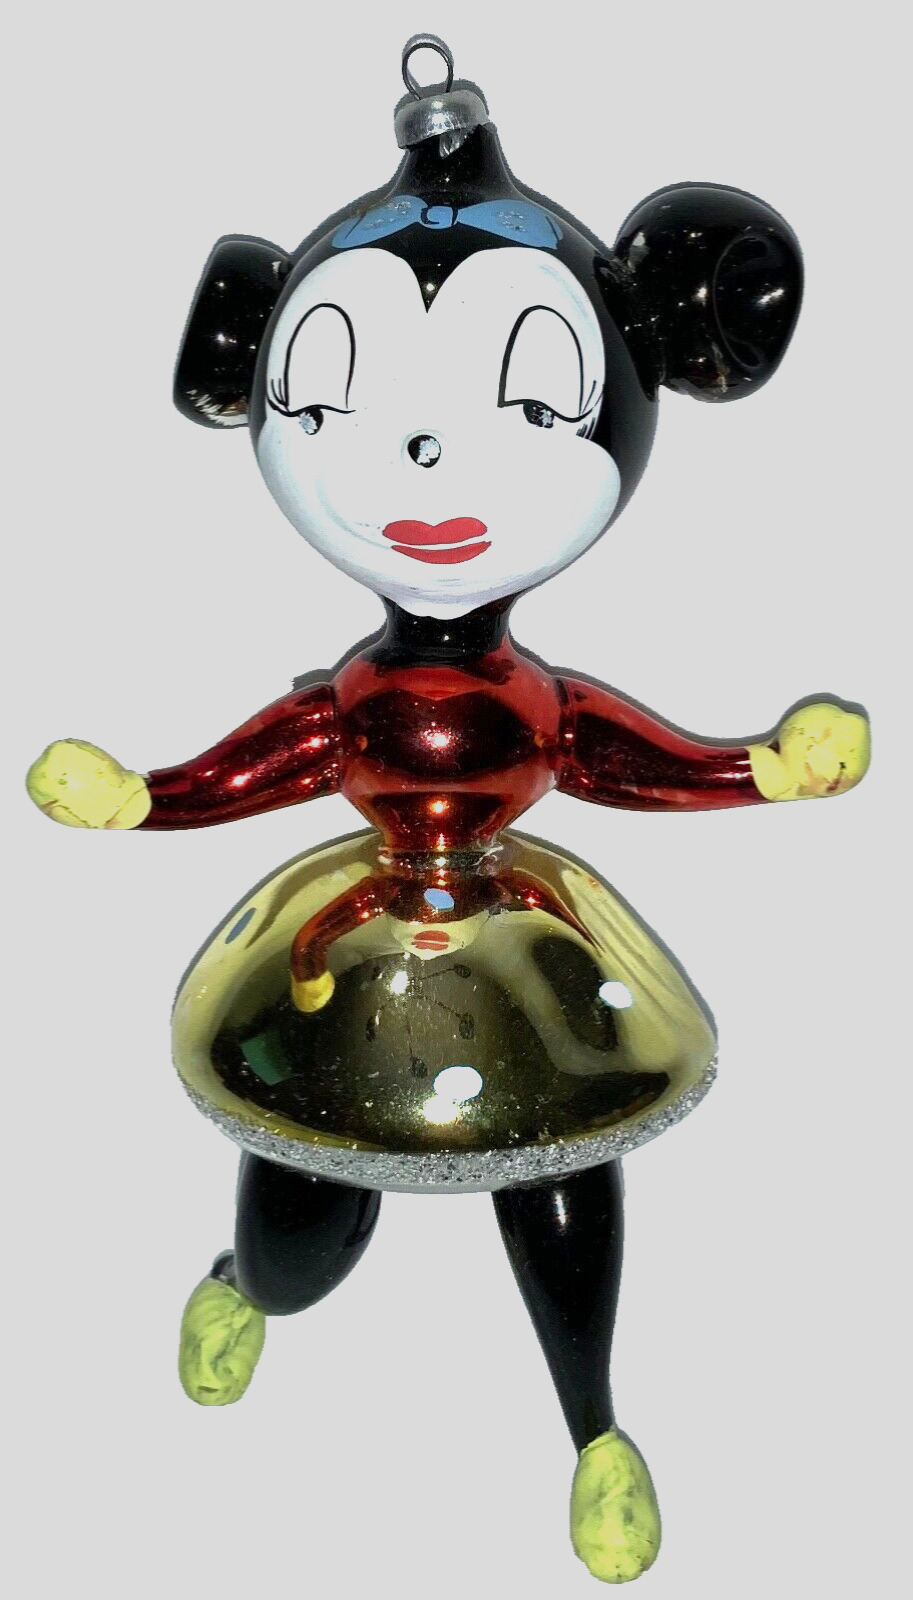 VINTAGE ITALIAN GLASS CHRISTMAS ORNAMENT - (UNOFFICIAL) MINNIE MOUSE